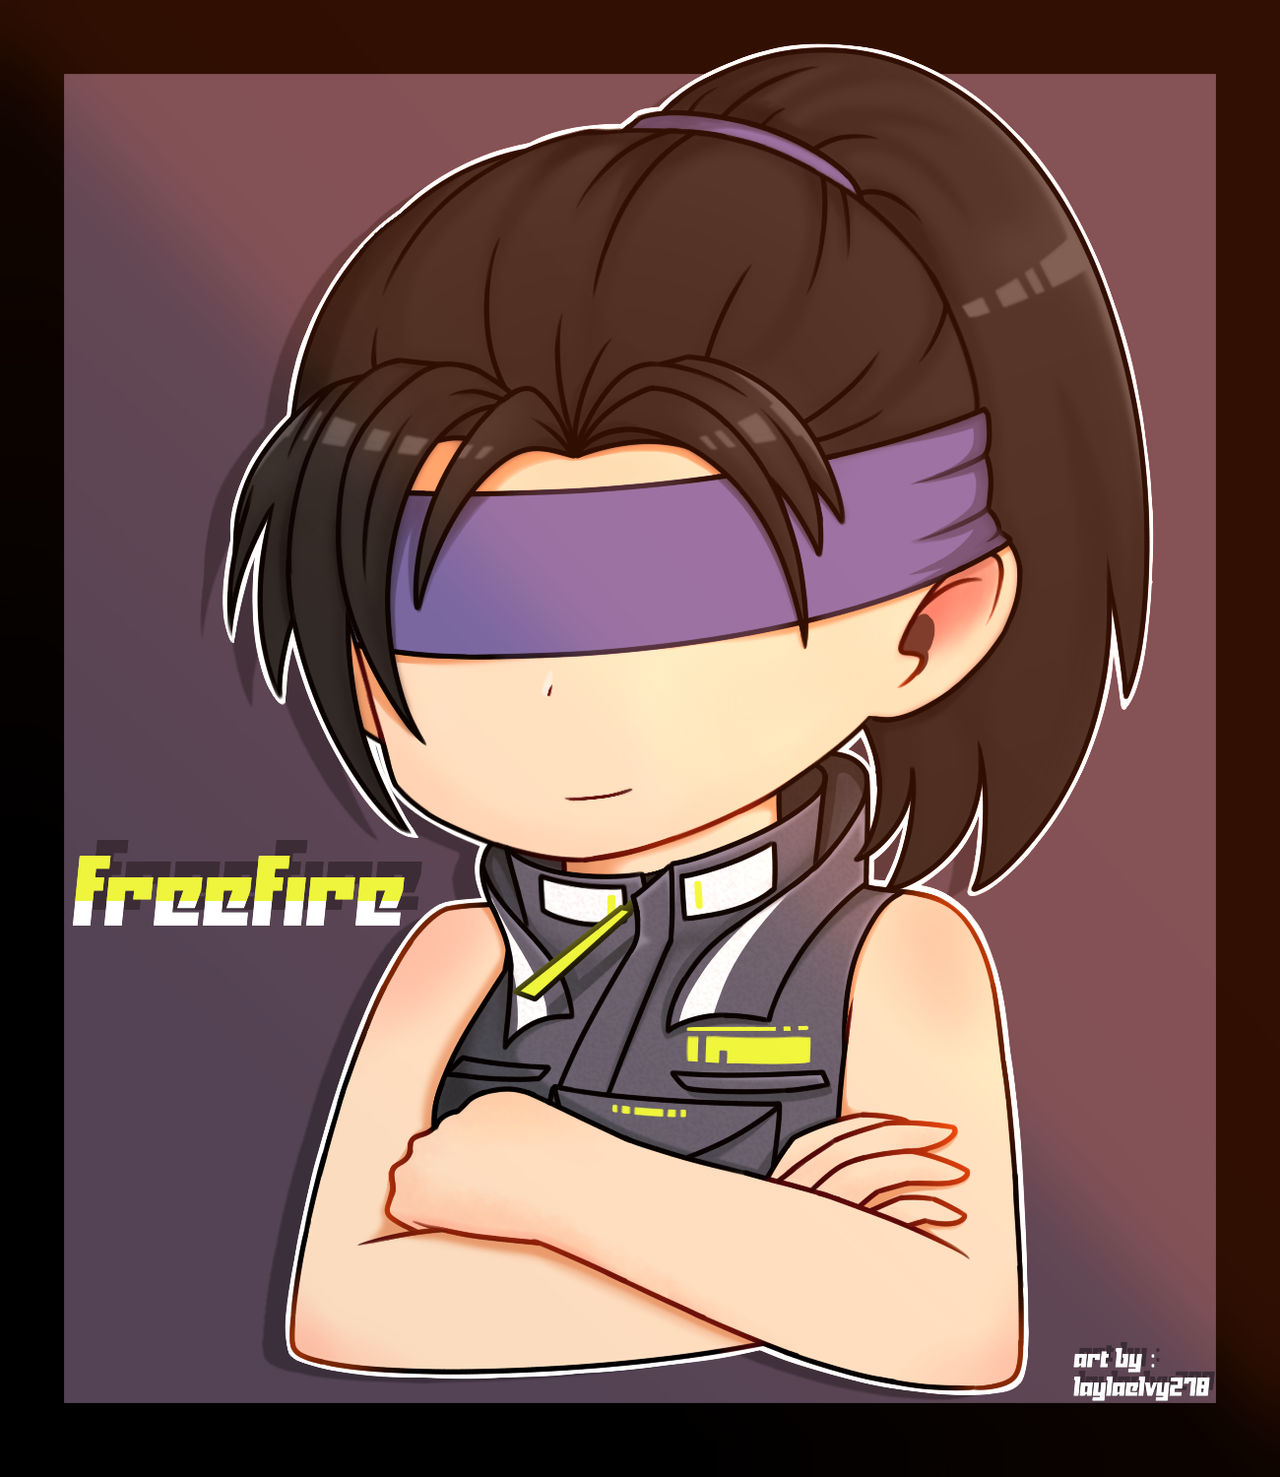 FreeFire (Girl Character) by LaylaElvy278 on DeviantArt